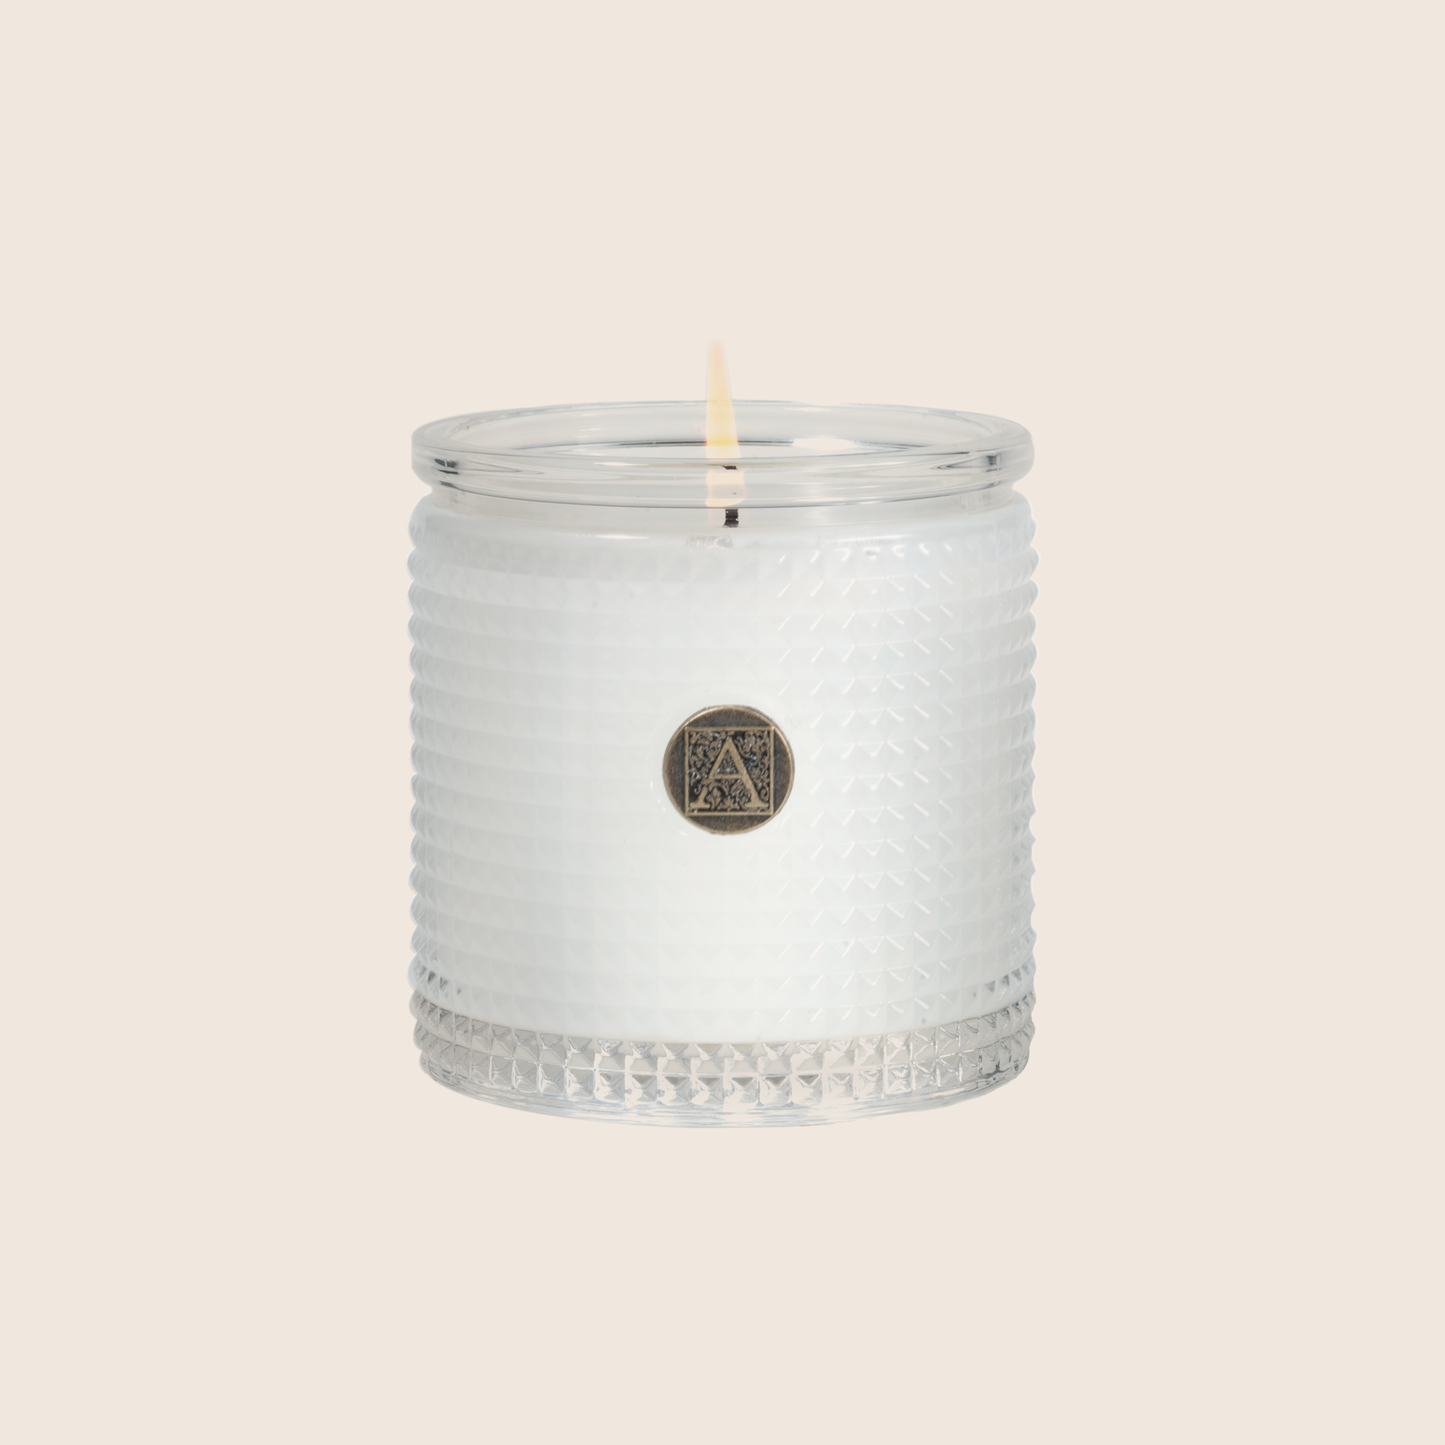 The White Teak & Moss Textured Glass Candle is the perfect everyday scent with a clean fragrance of fresh citrus over notes of earthy moss, coconut, and sandalwood. Our candles are all hand-poured in Arkansas. Made with a proprietary wax blend, ethically sourced containers and cotton wicks. Light one of these aromatic candles and transport yourself to a memory or emotion.